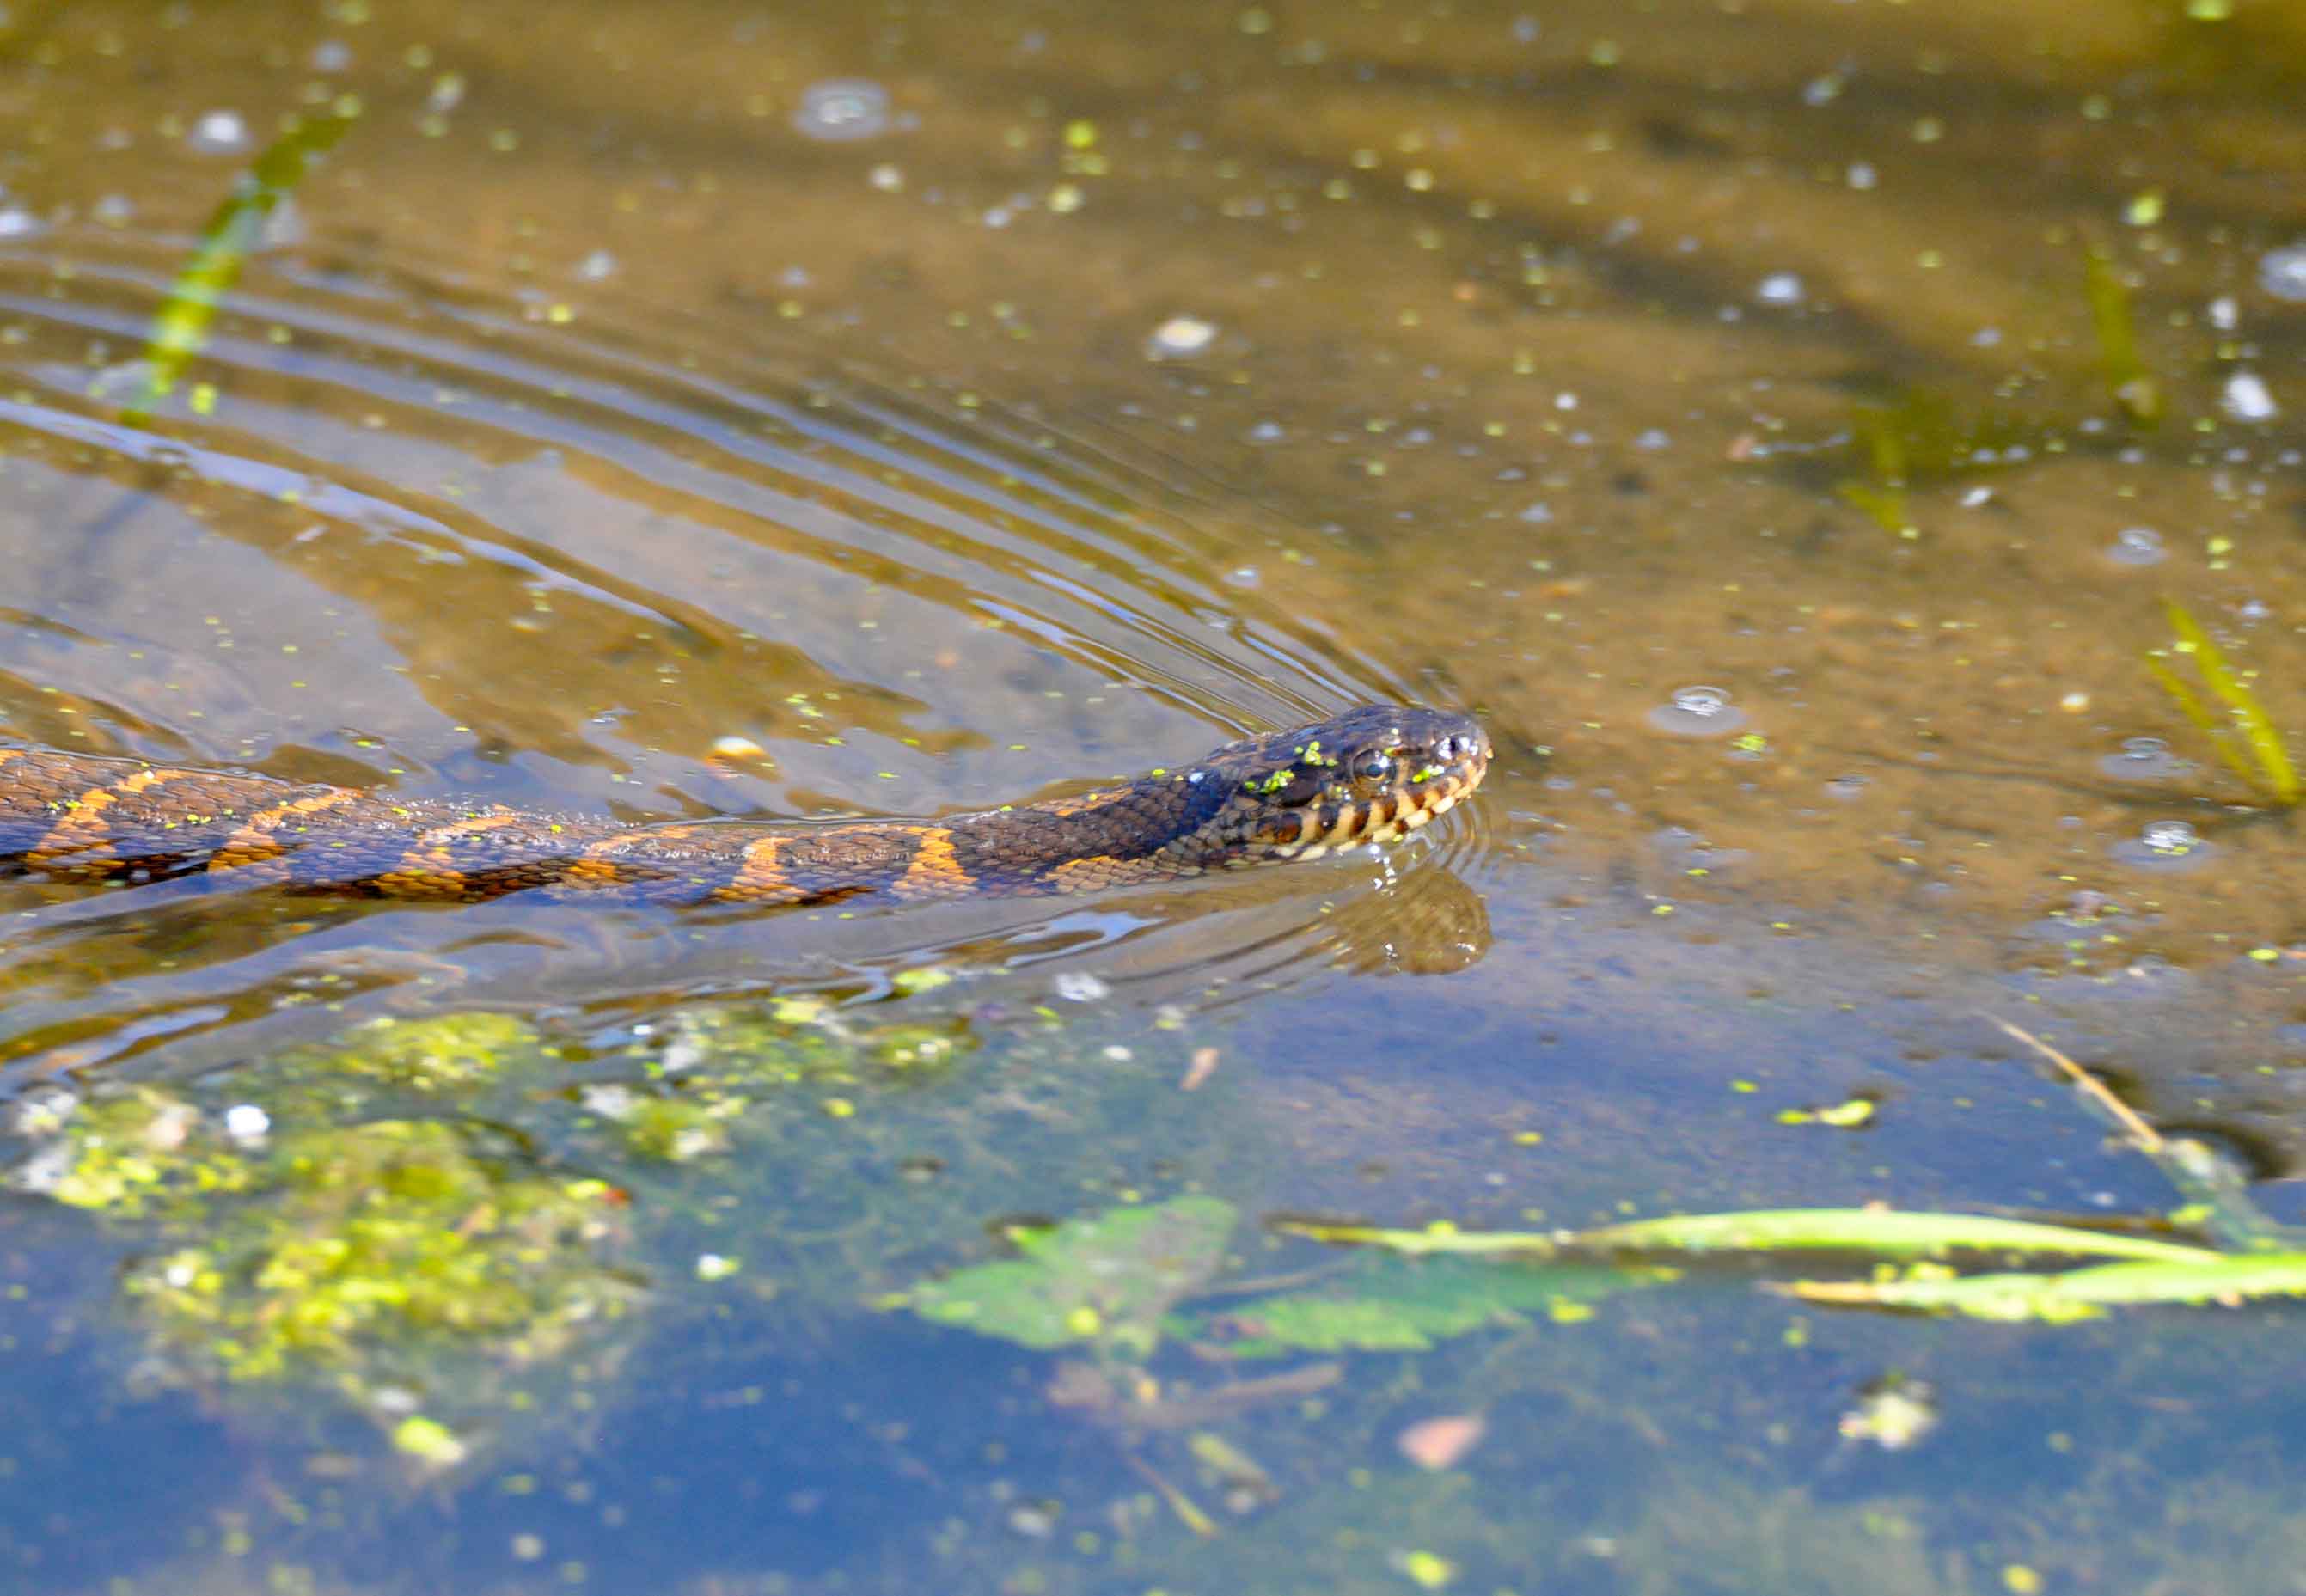 Northern water snake in the water.